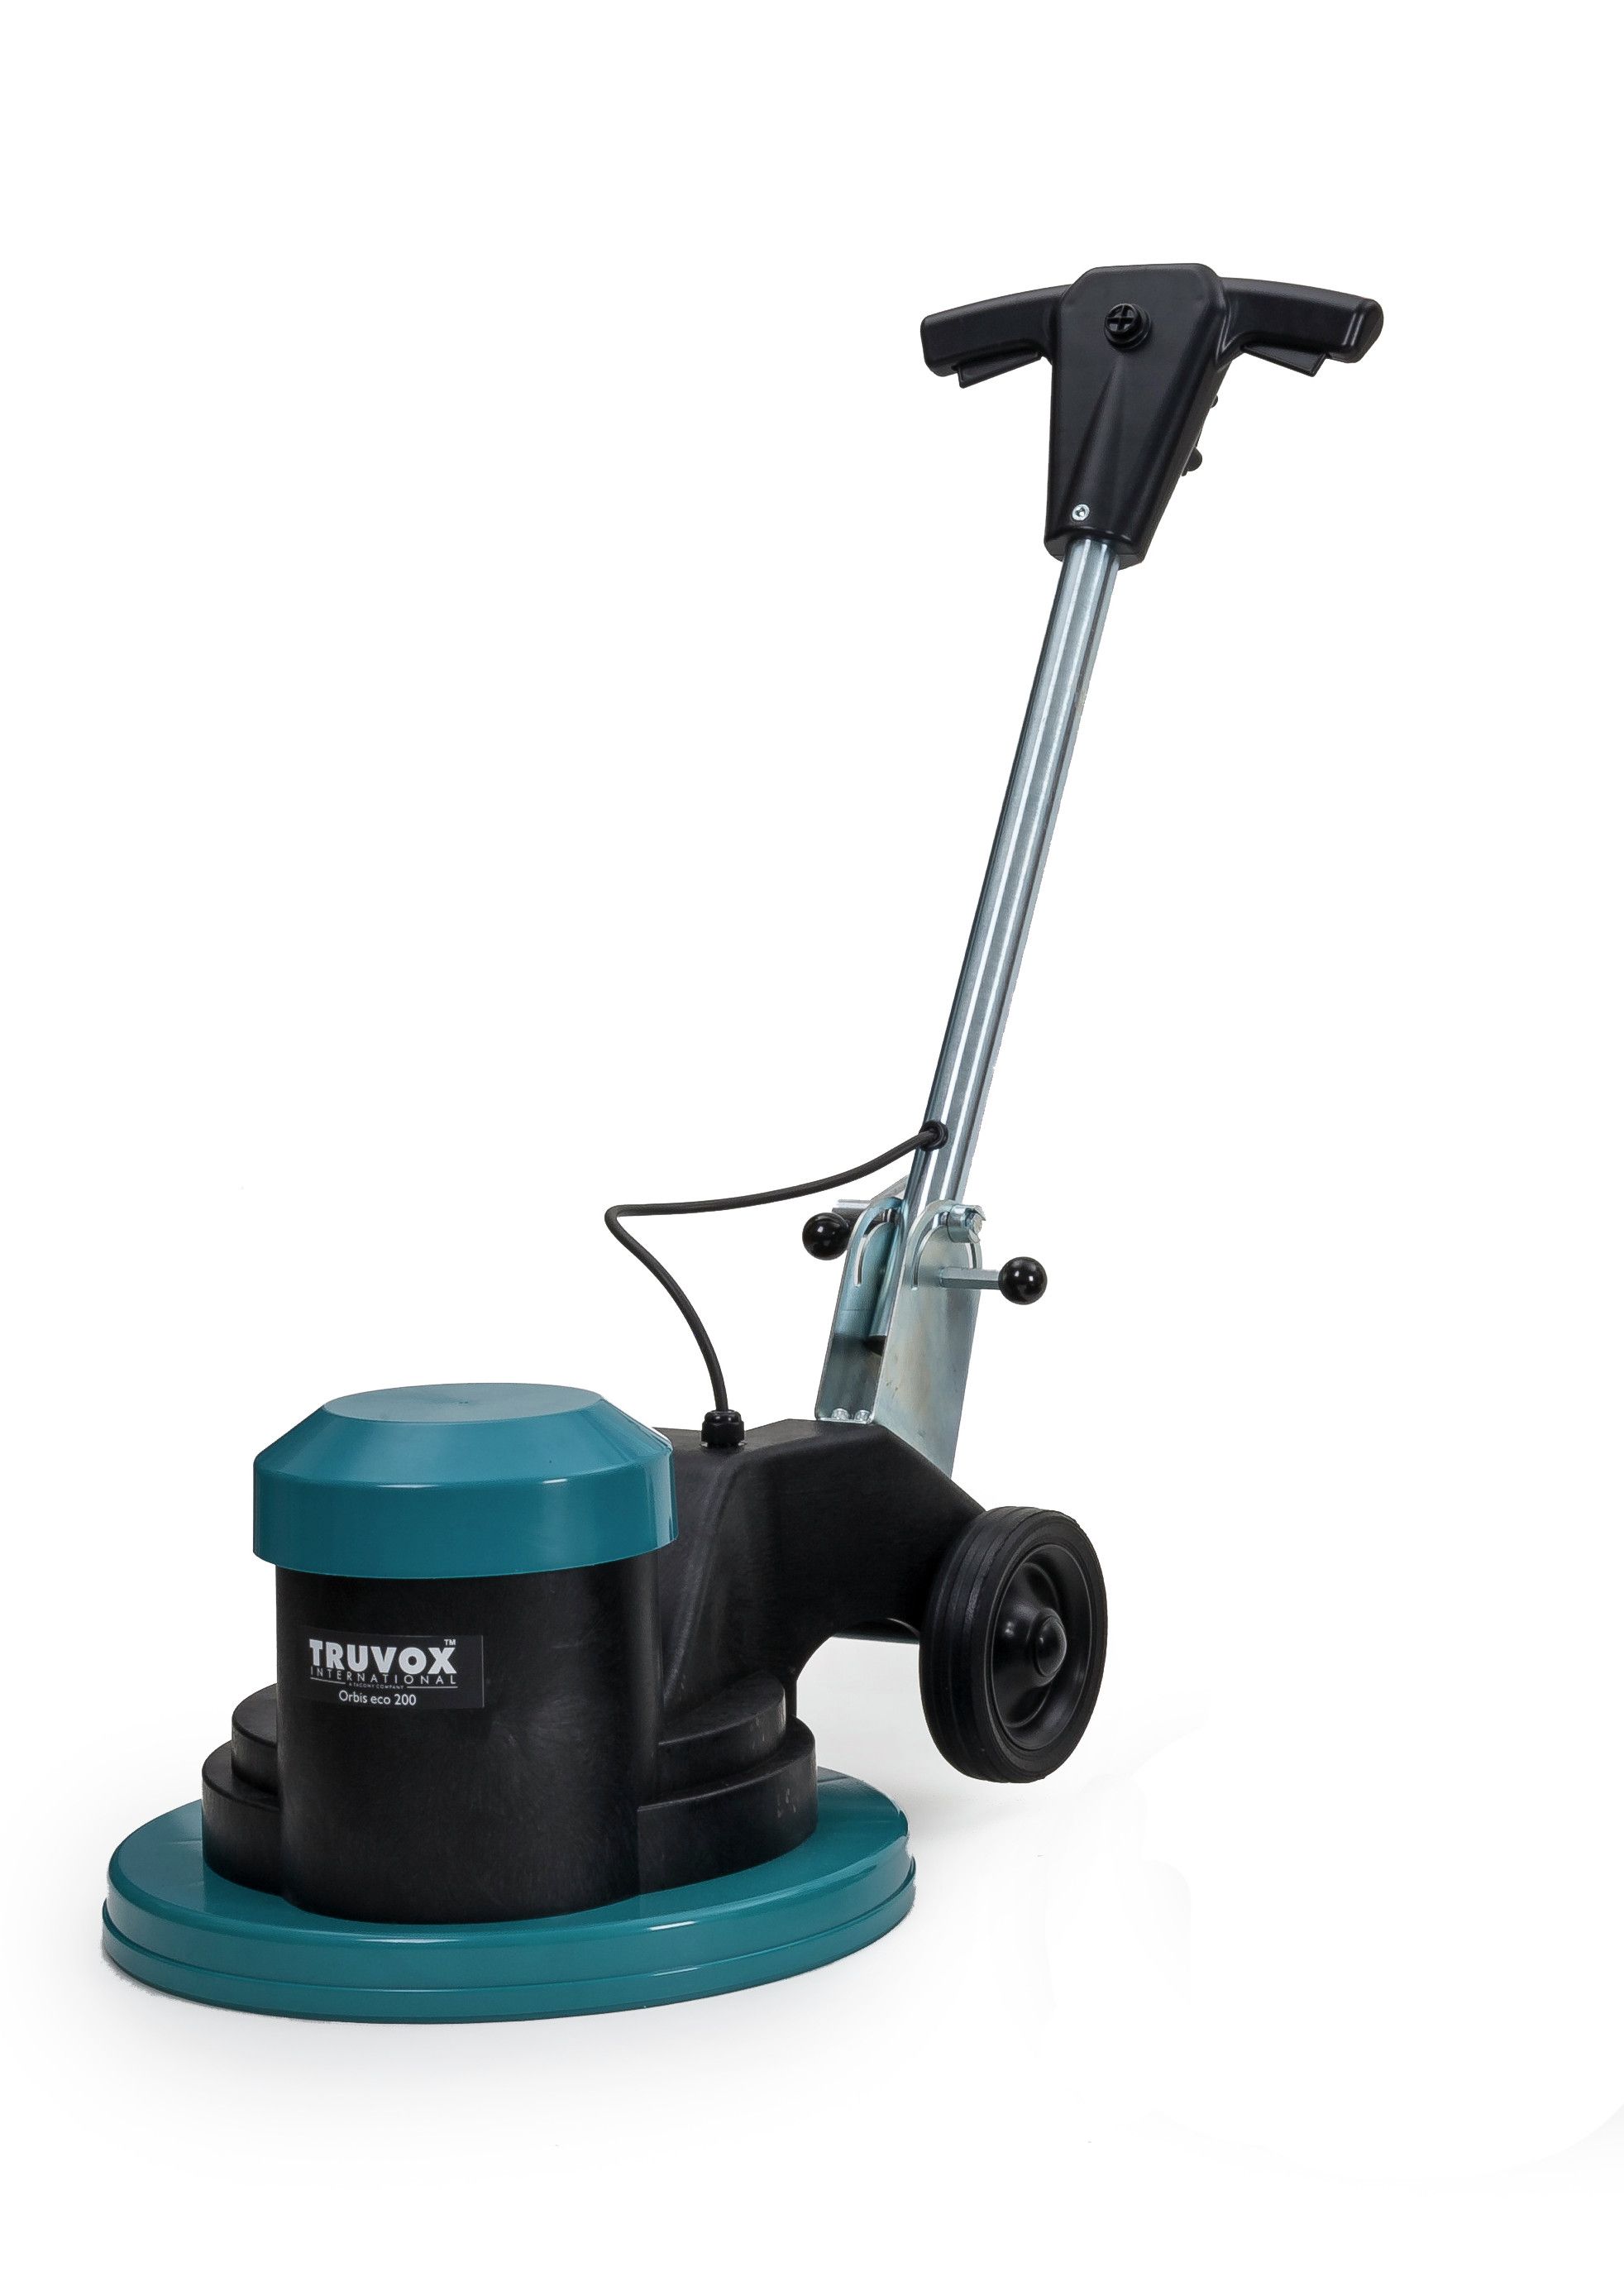 Truvox Orbis Eco 200 Rotary with Pad Drive-Disc